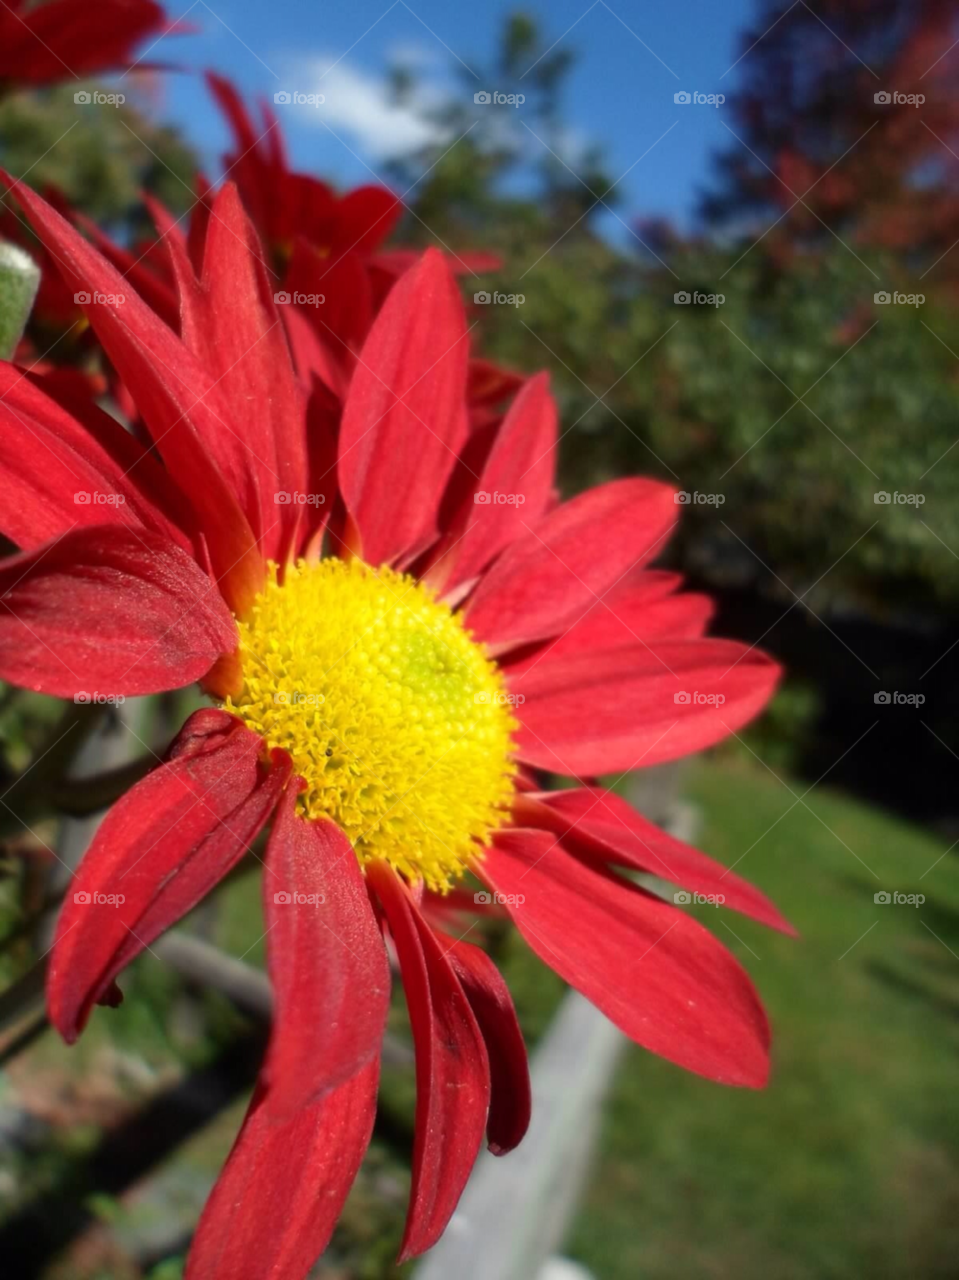 nature flower red daisy by jmh